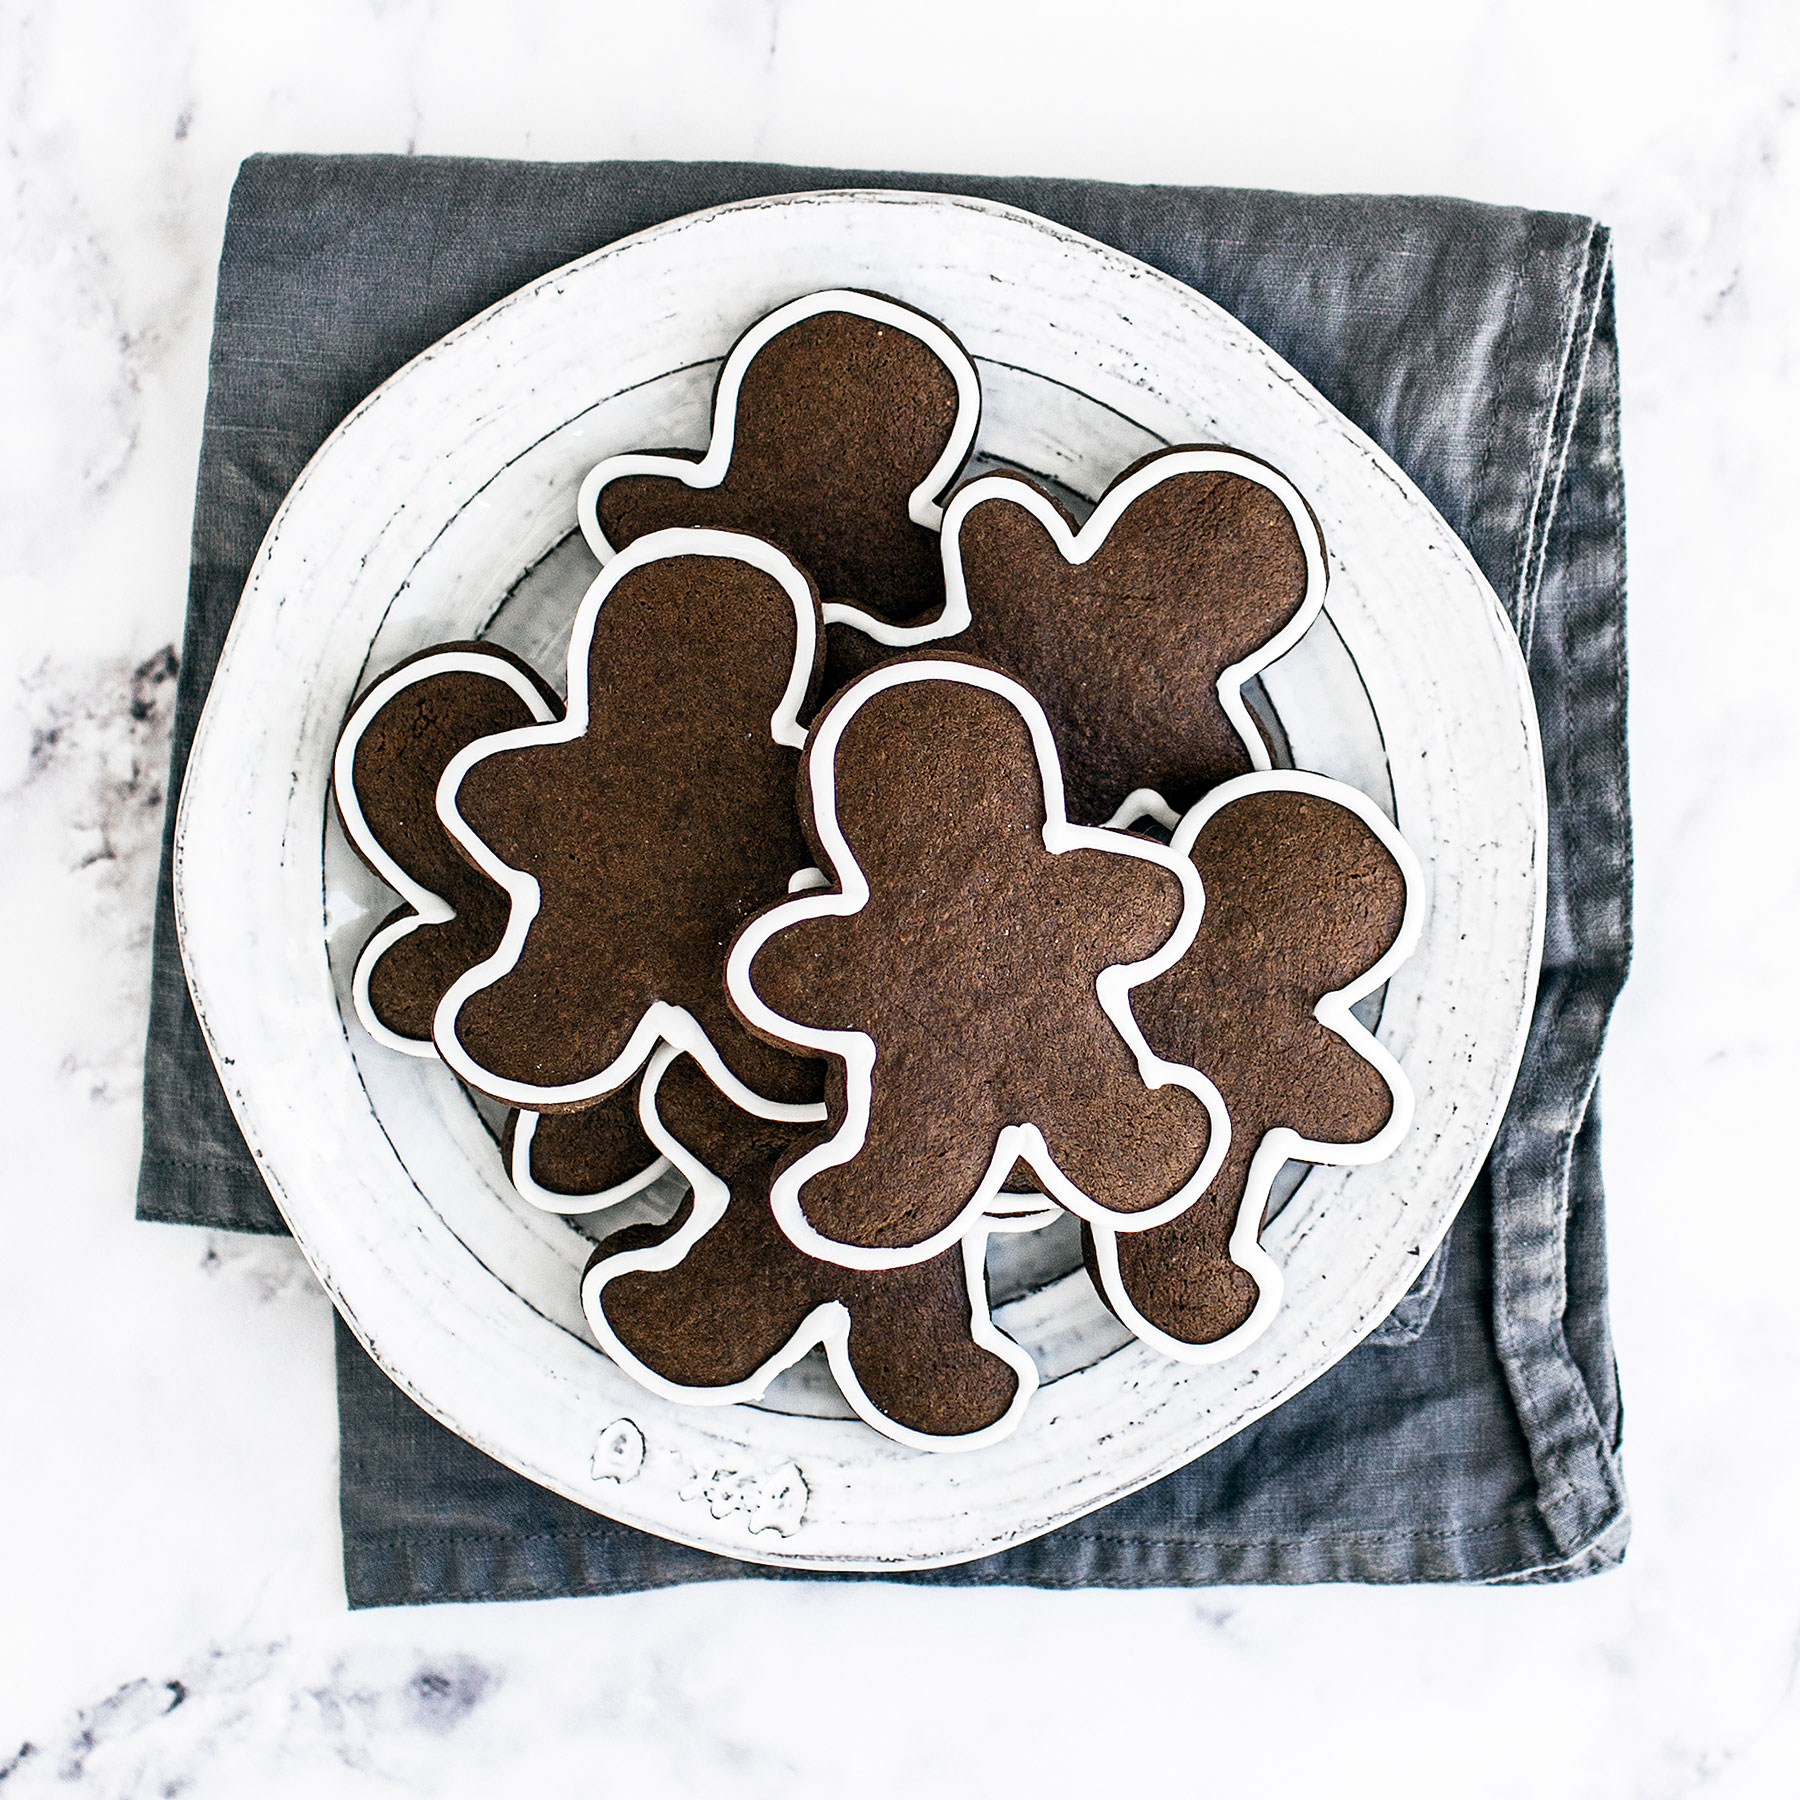 https://handletheheat.com/wp-content/uploads/2018/11/gingerbread-cookies-SQUARE-1.jpg